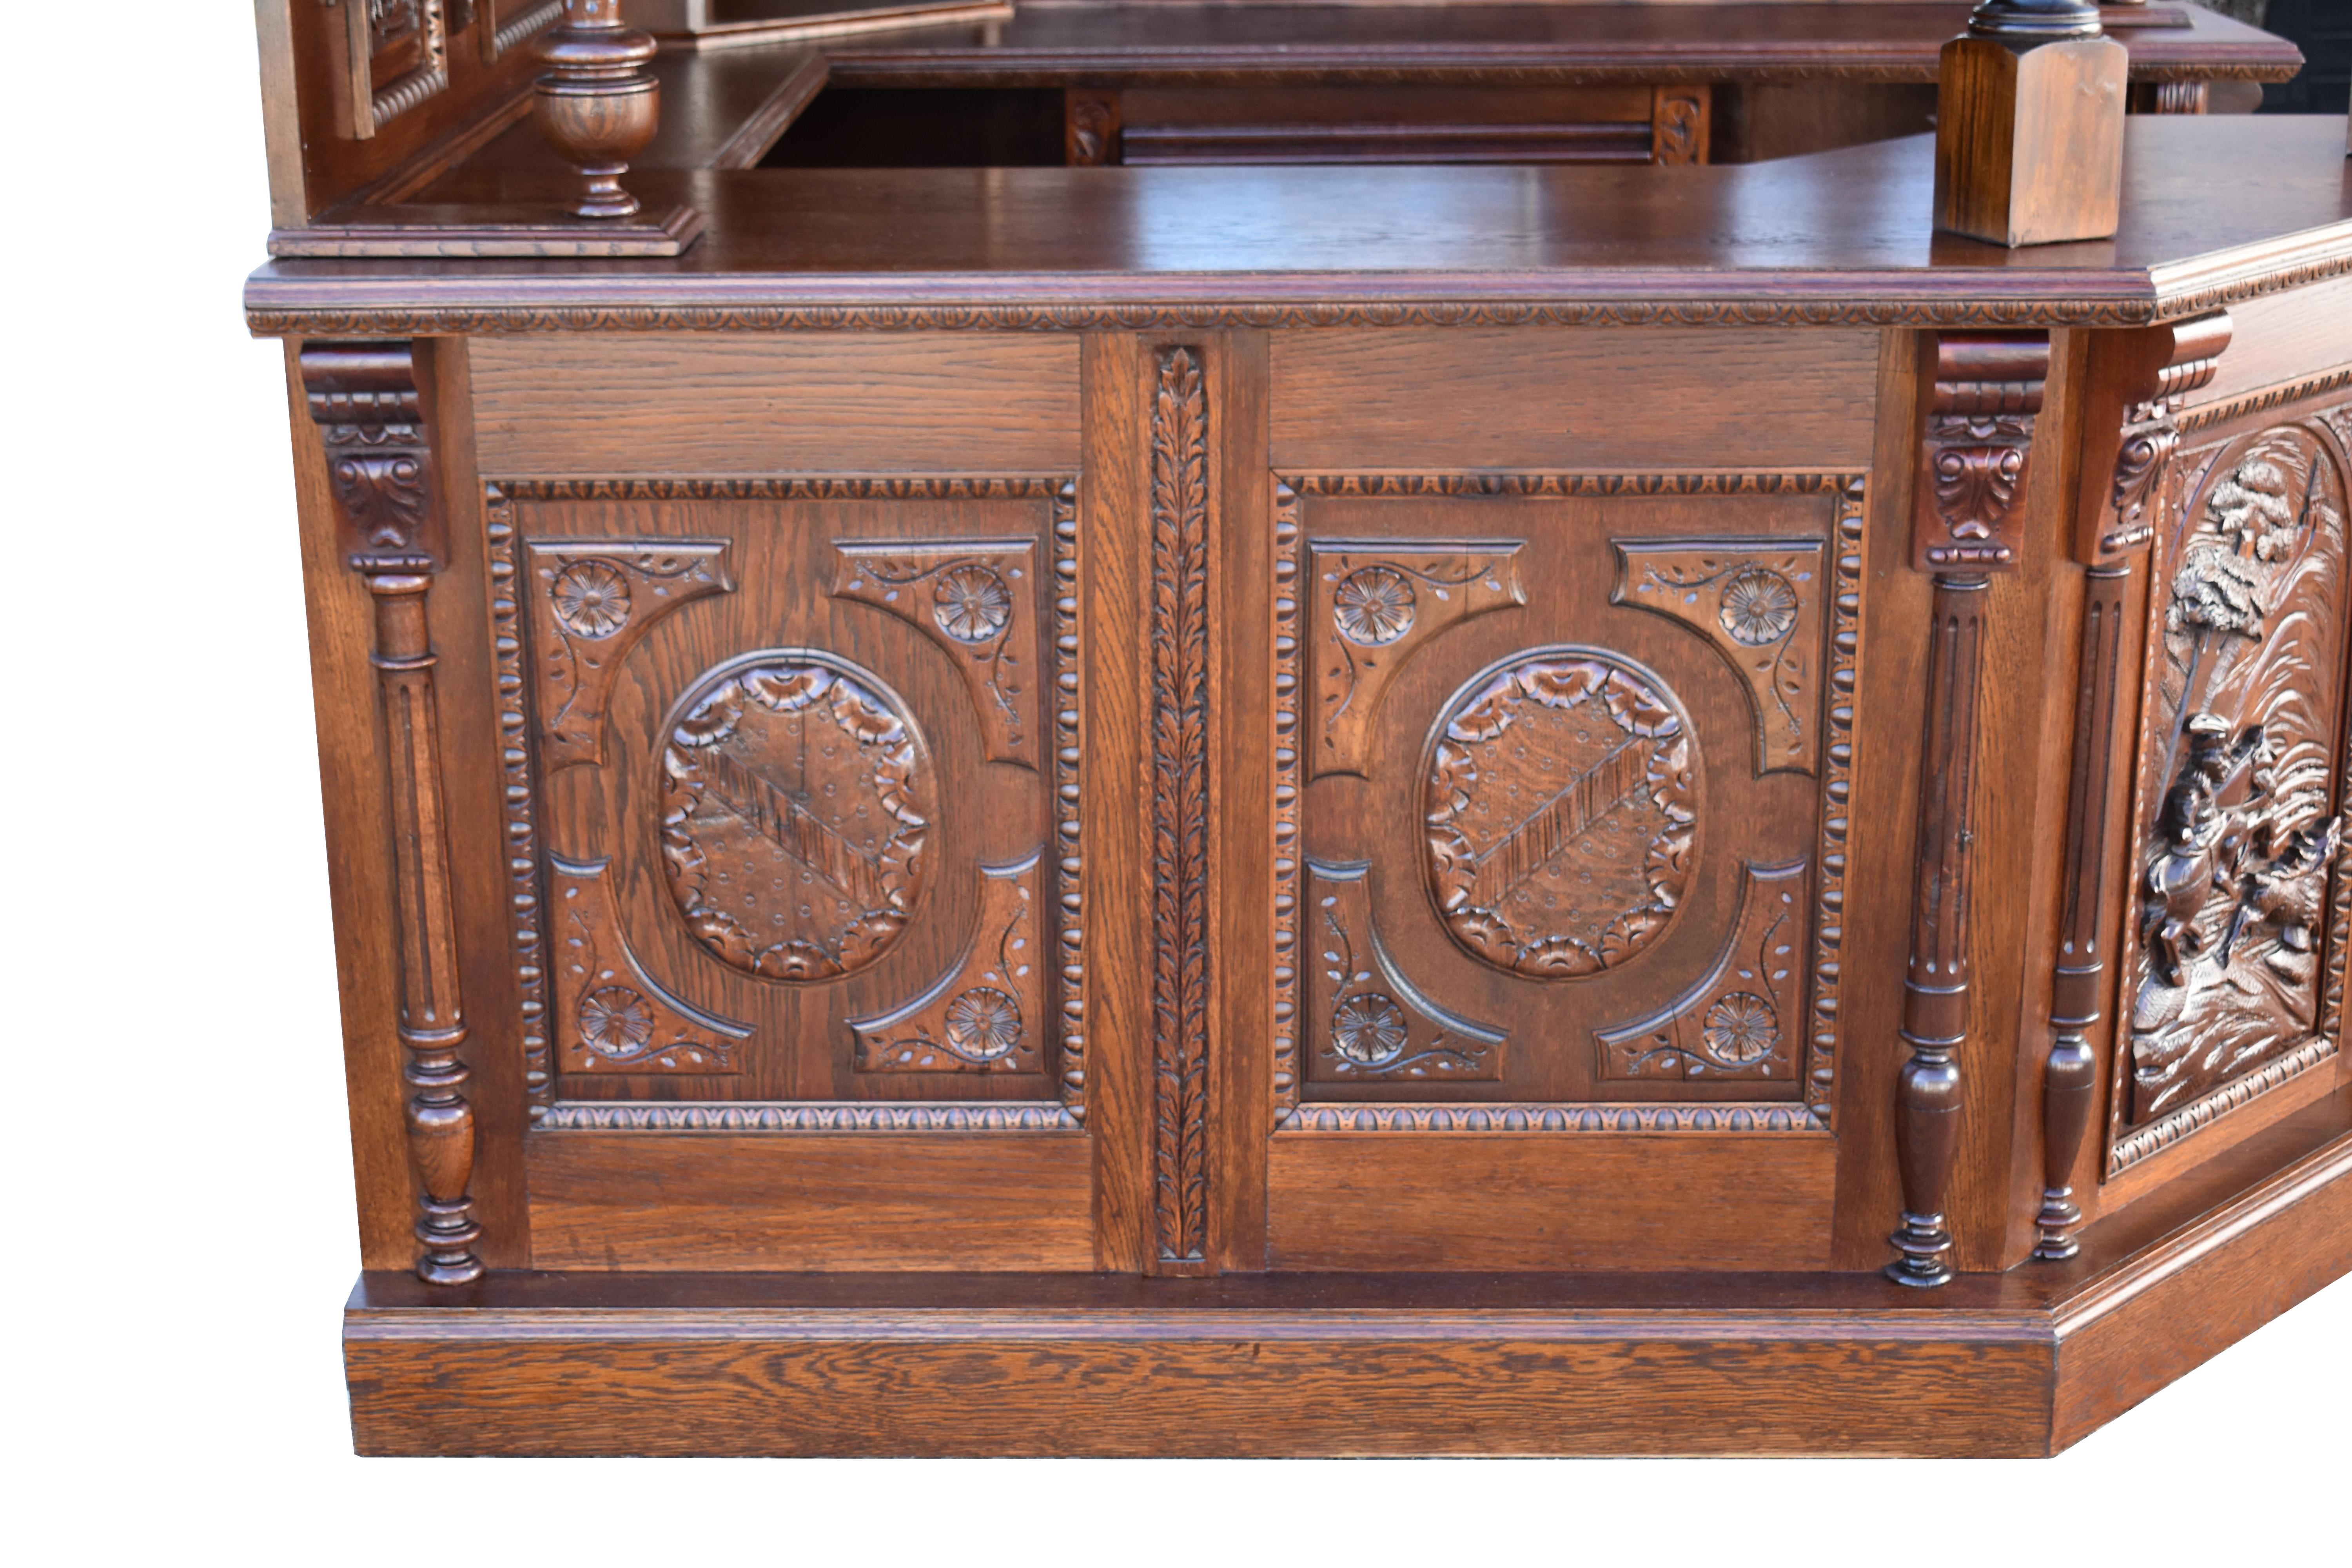 For sale is a Fine quality Victorian Carved Oak Canted Corner Bar, fully restored using as much antique timber as possible. Having ornate carved panels, engraved mirrors, and leaded glass, the bar is in excellent condition.